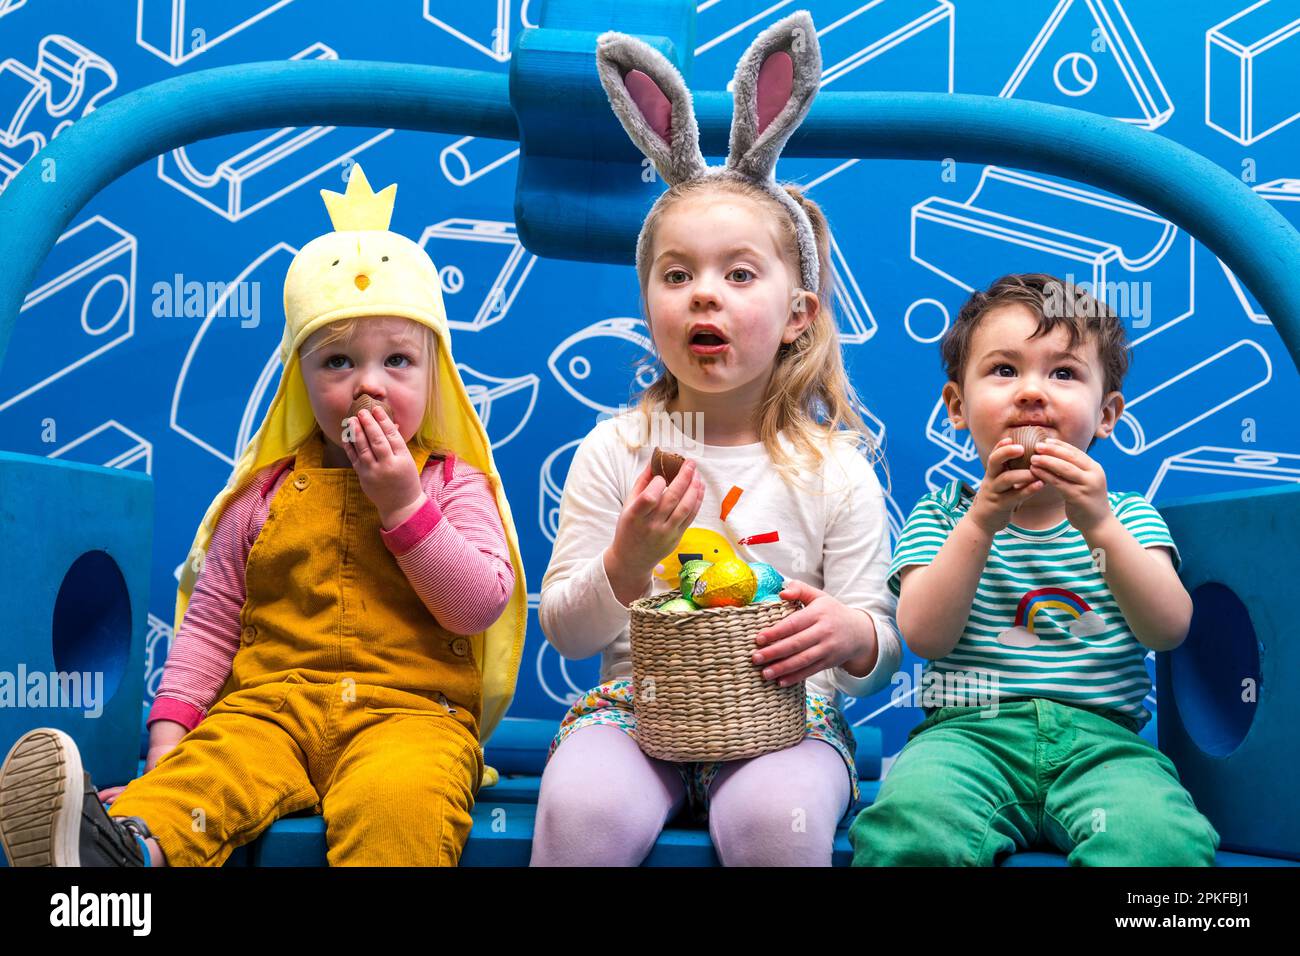 Three happy young children eating chocolate Easter eggs at Edinburgh Science Festival, Scotland, UK Stock Photo